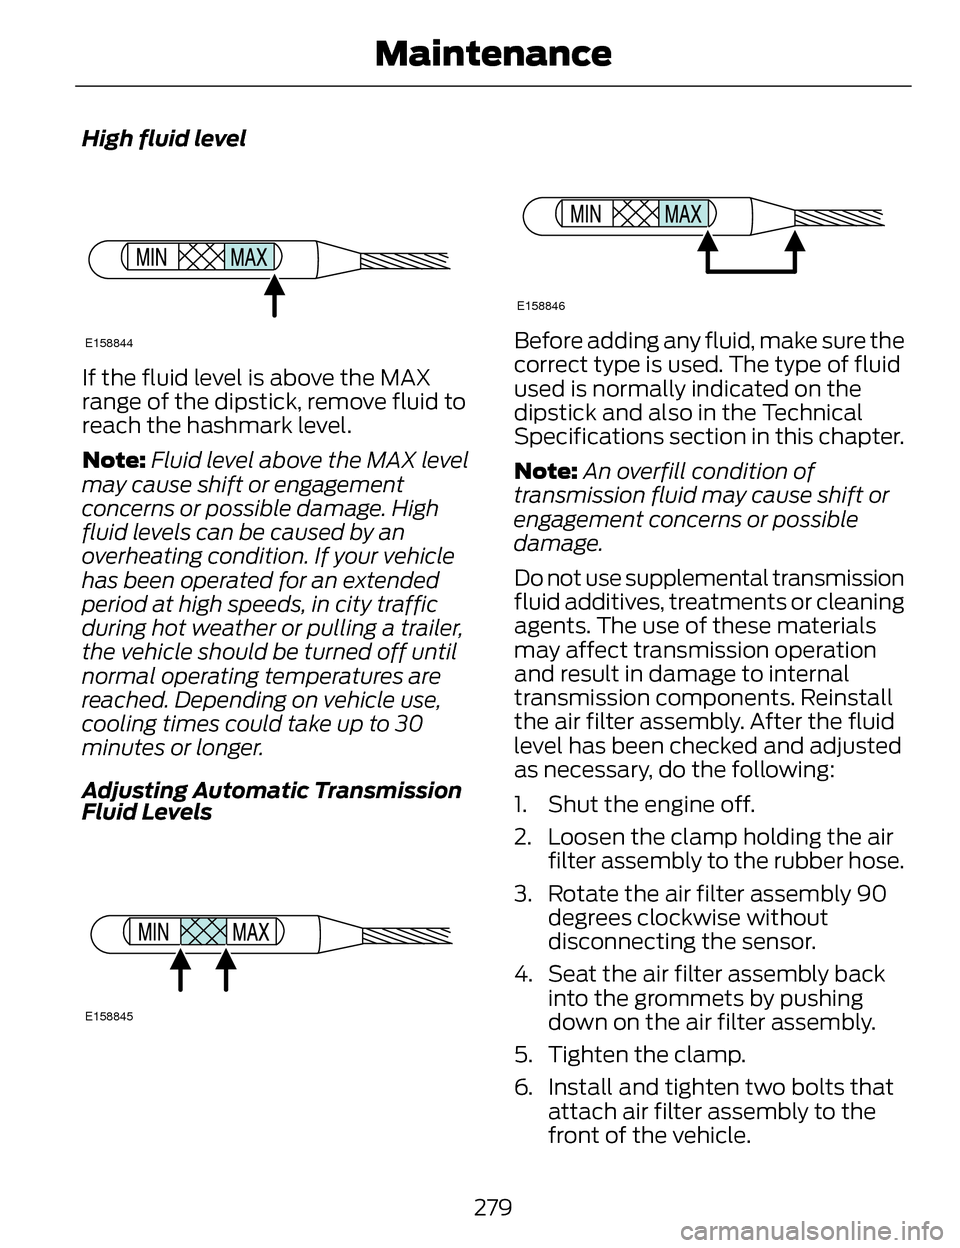 LINCOLN MKZ 2014  Owners Manual High fluid level
E158844
If the fluid level is above the MAX
range of the dipstick, remove fluid to
reach the hashmark level.
Note:Fluid level above the MAX level
may cause shift or engagement
concern